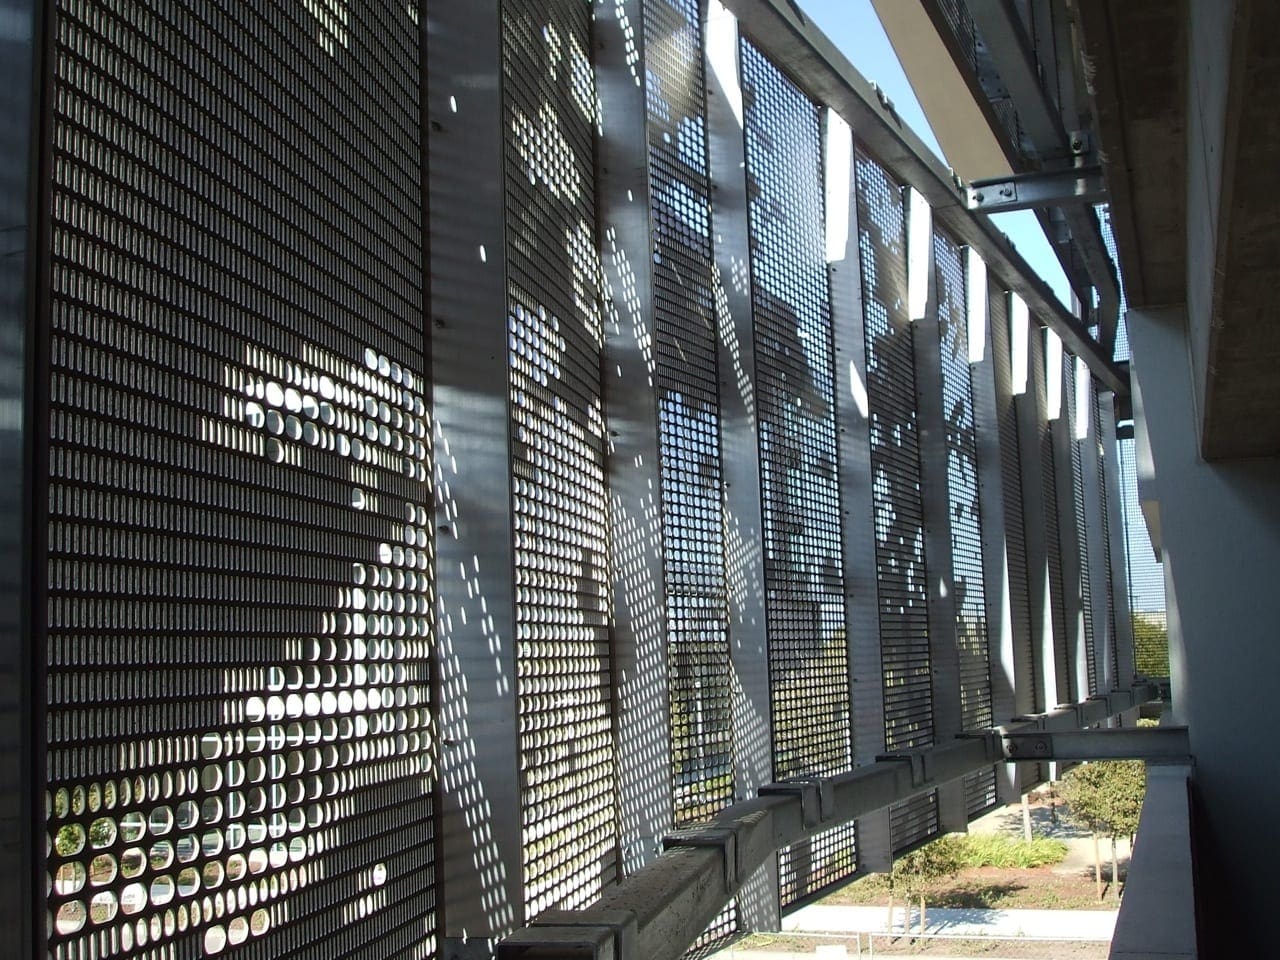 Detail of the perforated aluminum facade system from within the garage. 